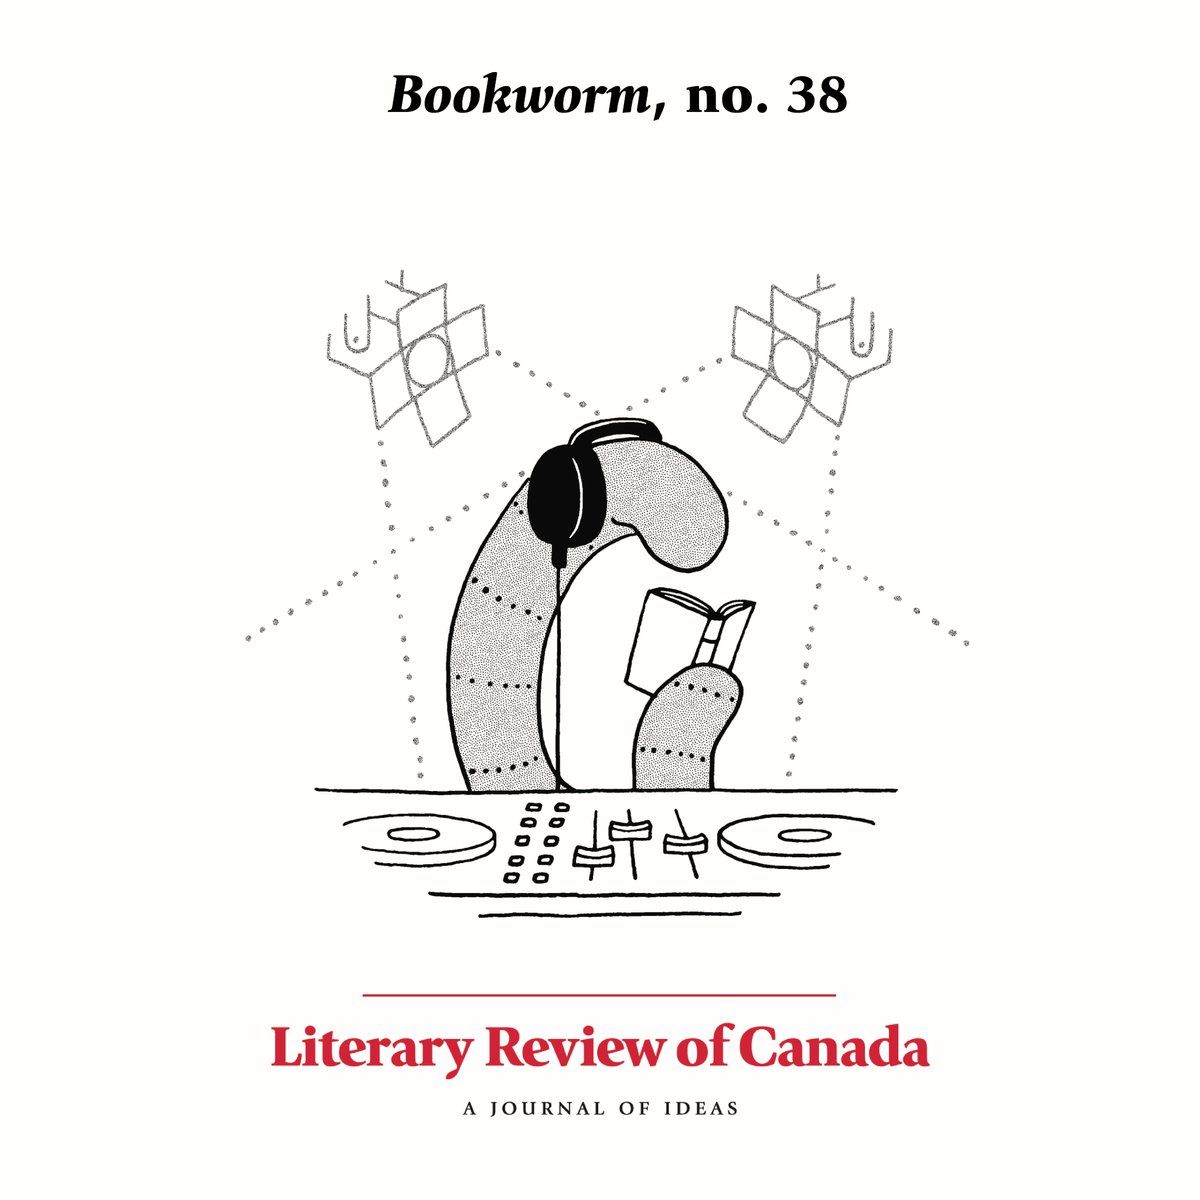 Bookworm just dropped the latest beat! No. 38 features @MiriLafontaine on Chris Oliveros’s FLQ graphic novel (@DandQ), Leighton Schreyer on “Psychedelics,” by @erikadyckhist (@mitpress), and a Q&A with contributors Ian Canon and Kyler Zeleny. reviewcanada.substack.com